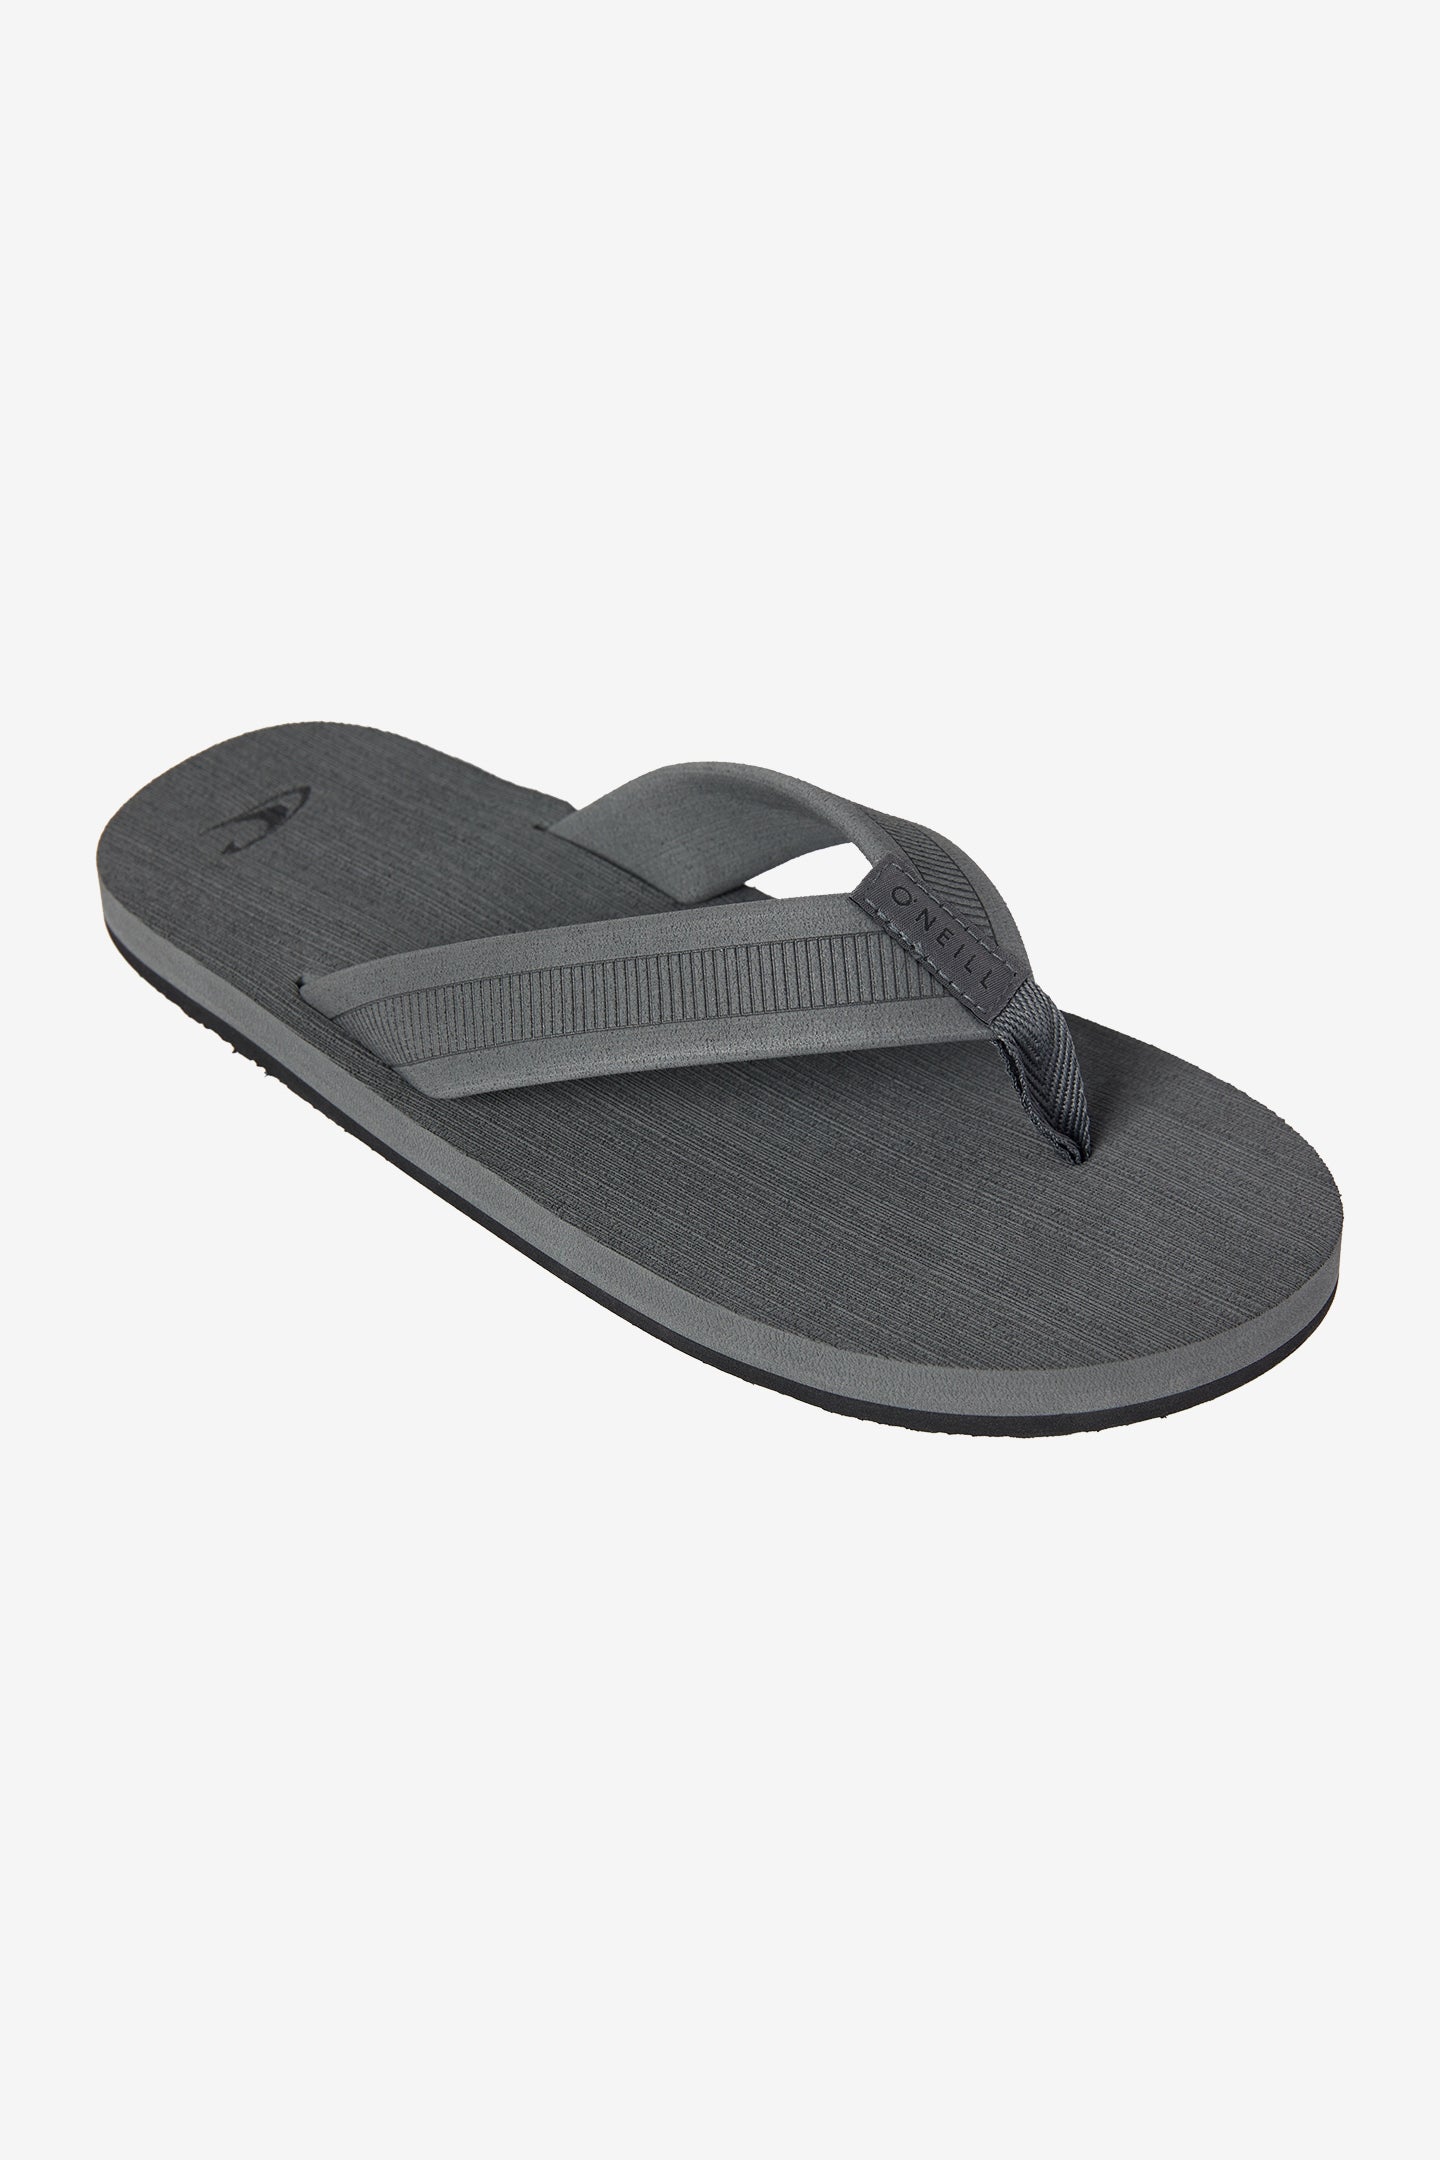 Expedition Sandals - Charcoal | O'Neill